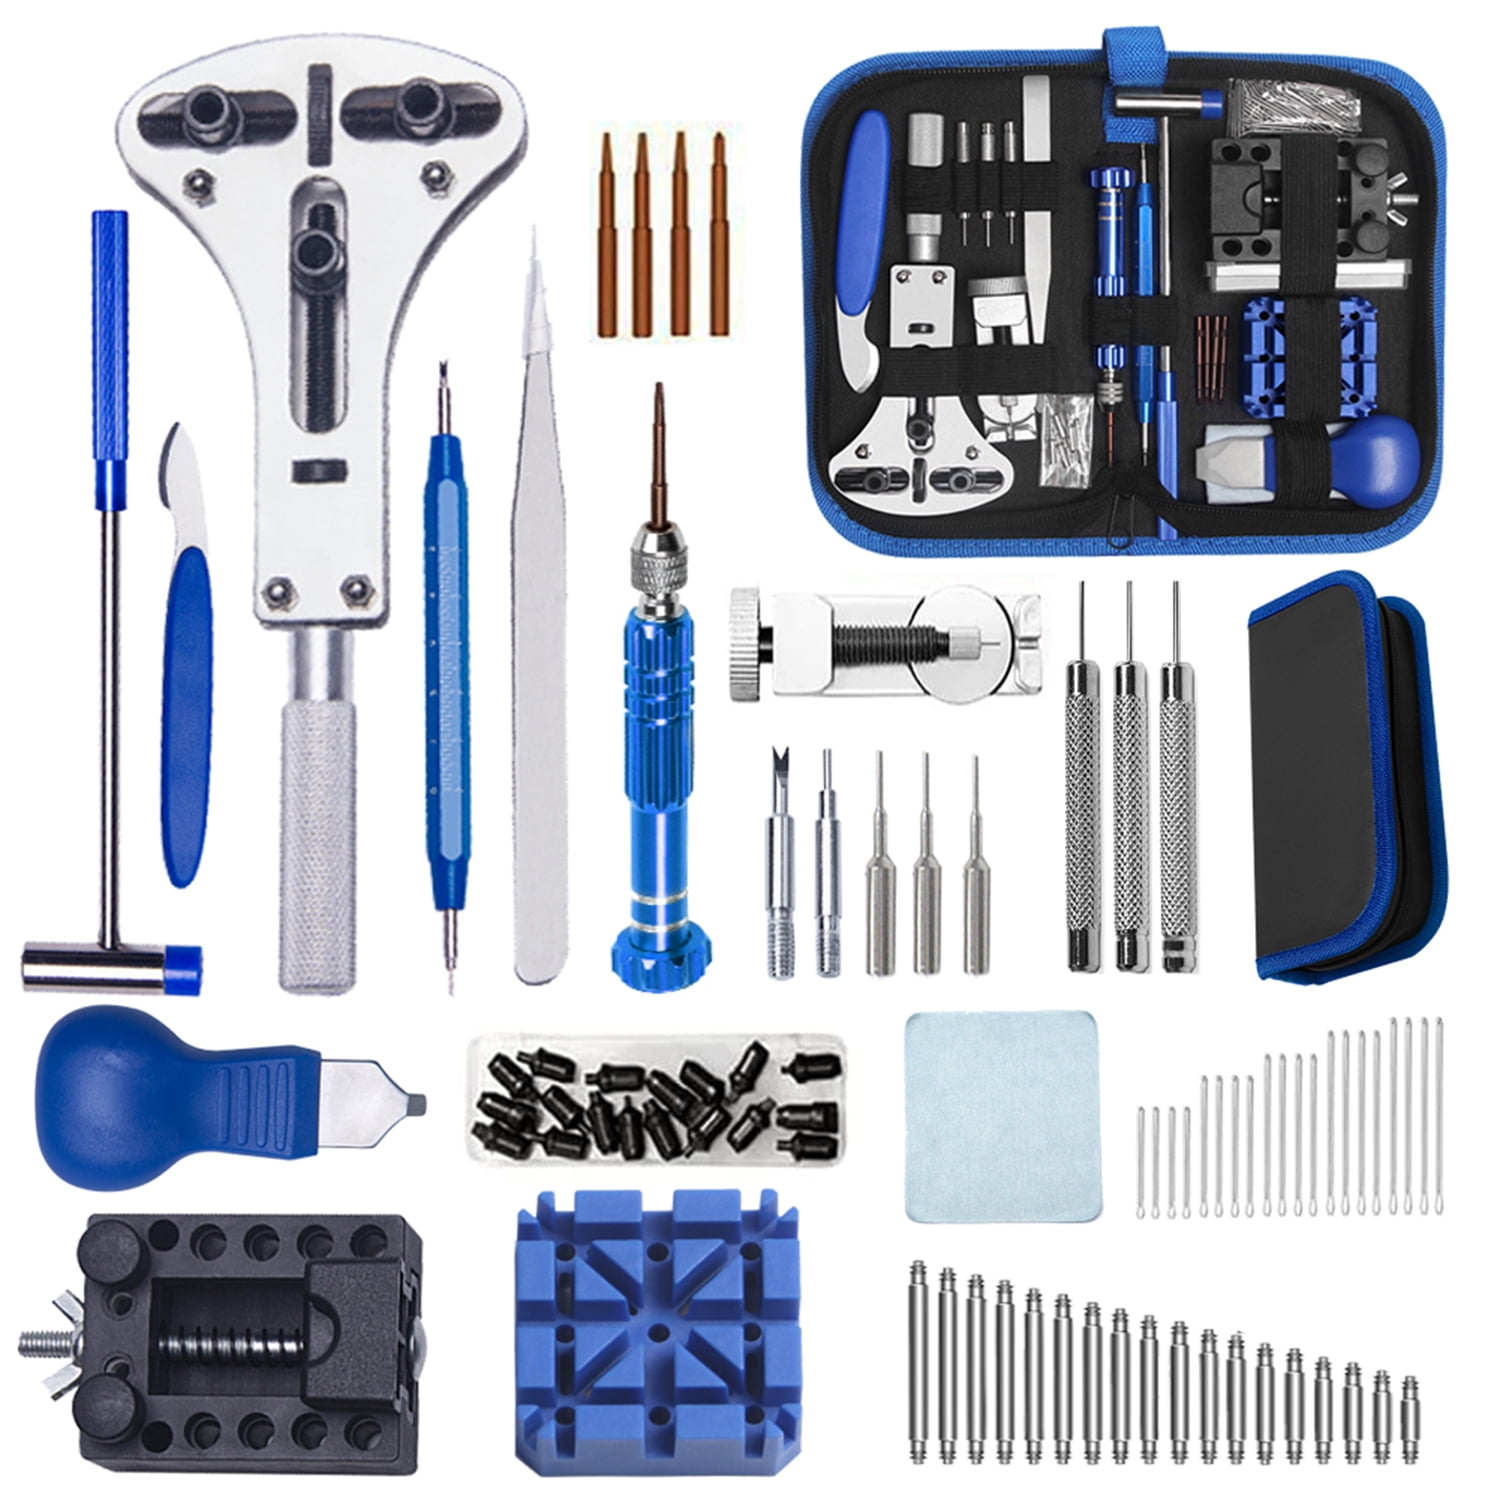 JOREST Watch Band Tool Kit, Repair Kit for Watch Strap Adjustment and and  with 696229158495